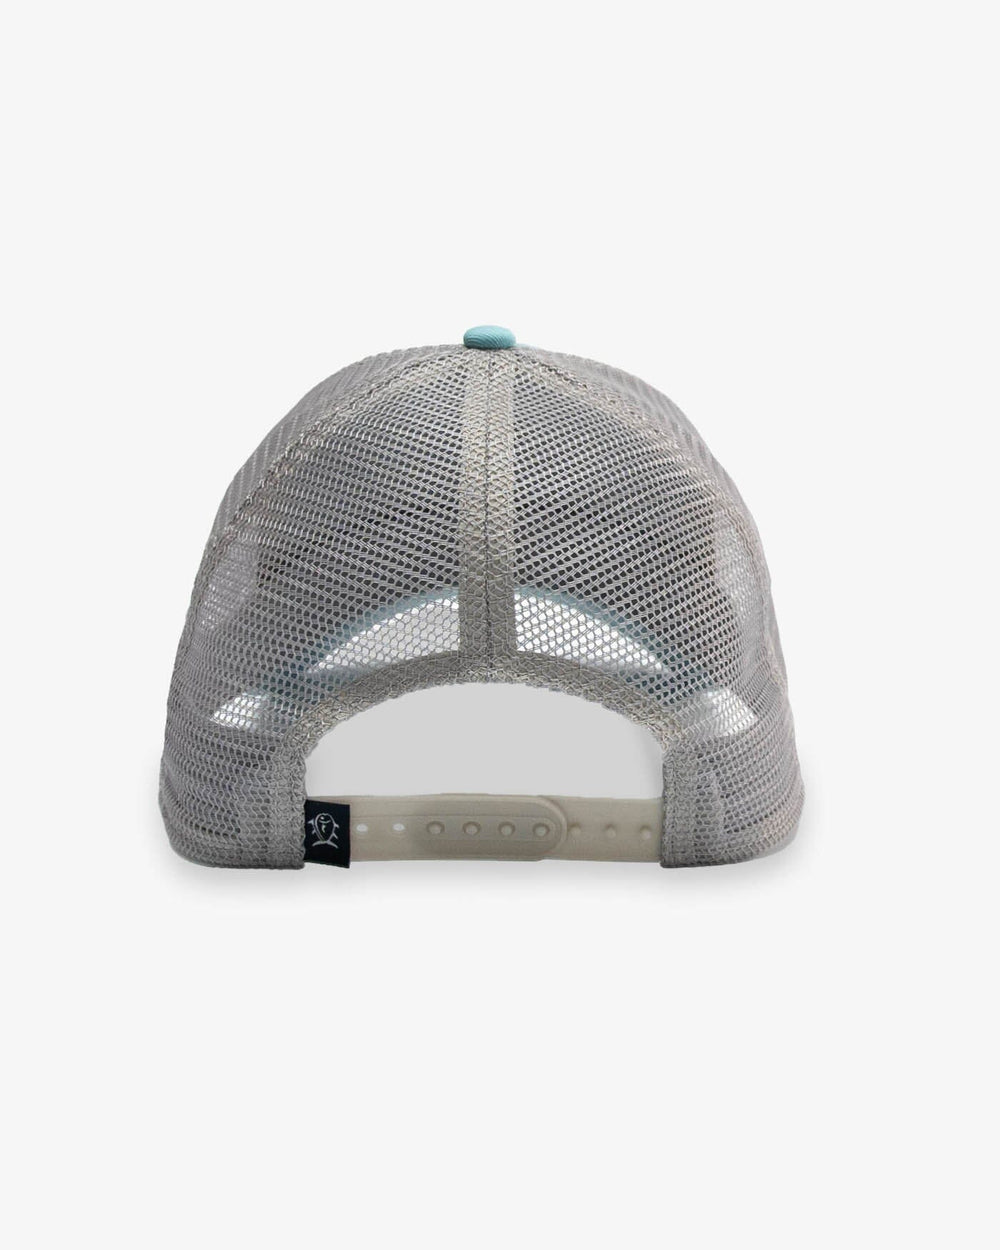 The back view of the Southern Tide Kids Skipjack Trademark Trucker Hat by Southern Tide - Blue